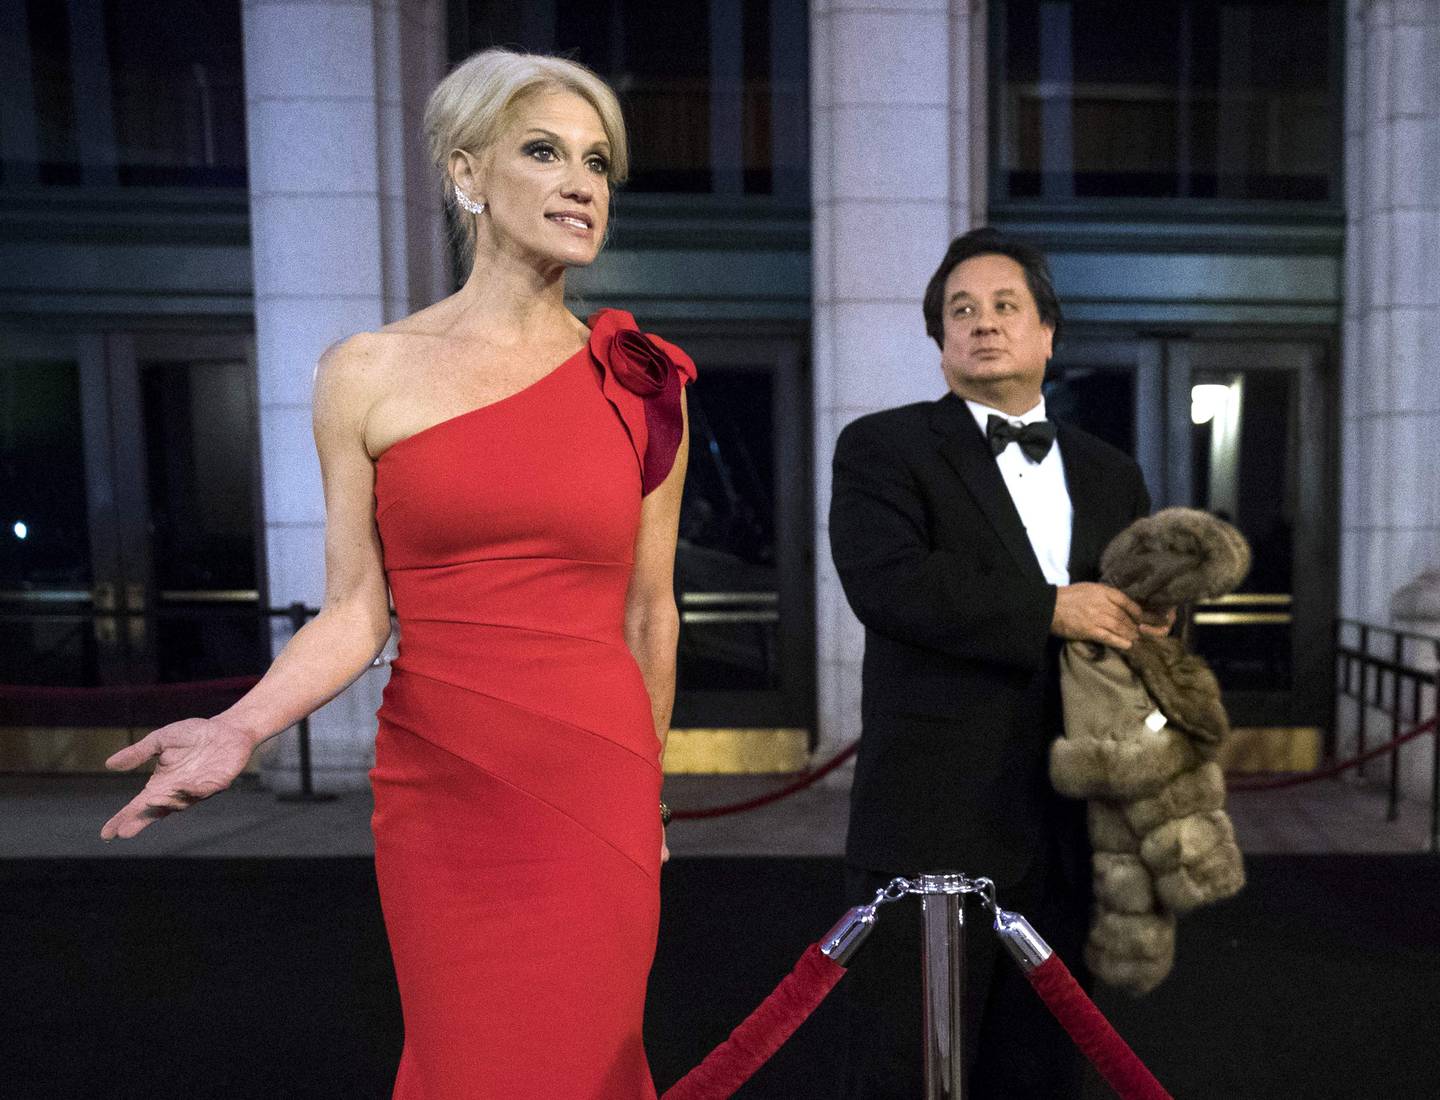 (FILES) In this file photo taken on January 19, 2017, senior advisor to President-elect Donald Trump, Kellyanne Conway (L), accompanied by her husband George Conway (C), speaks to reporters as they arrives at Union Station for a dinner for campaign donors in Washington. DC. - Who really gets under Donald Trump's skin? A man who has been dead since last year and another whom the president says he hardly knows. At least that's the bizarre picture painted by Trump this week in angry rants at the late senator John McCain and a Washington lawyer called George Conway. (Photo by Drew Angerer / GETTY IMAGES NORTH AMERICA / AFP)